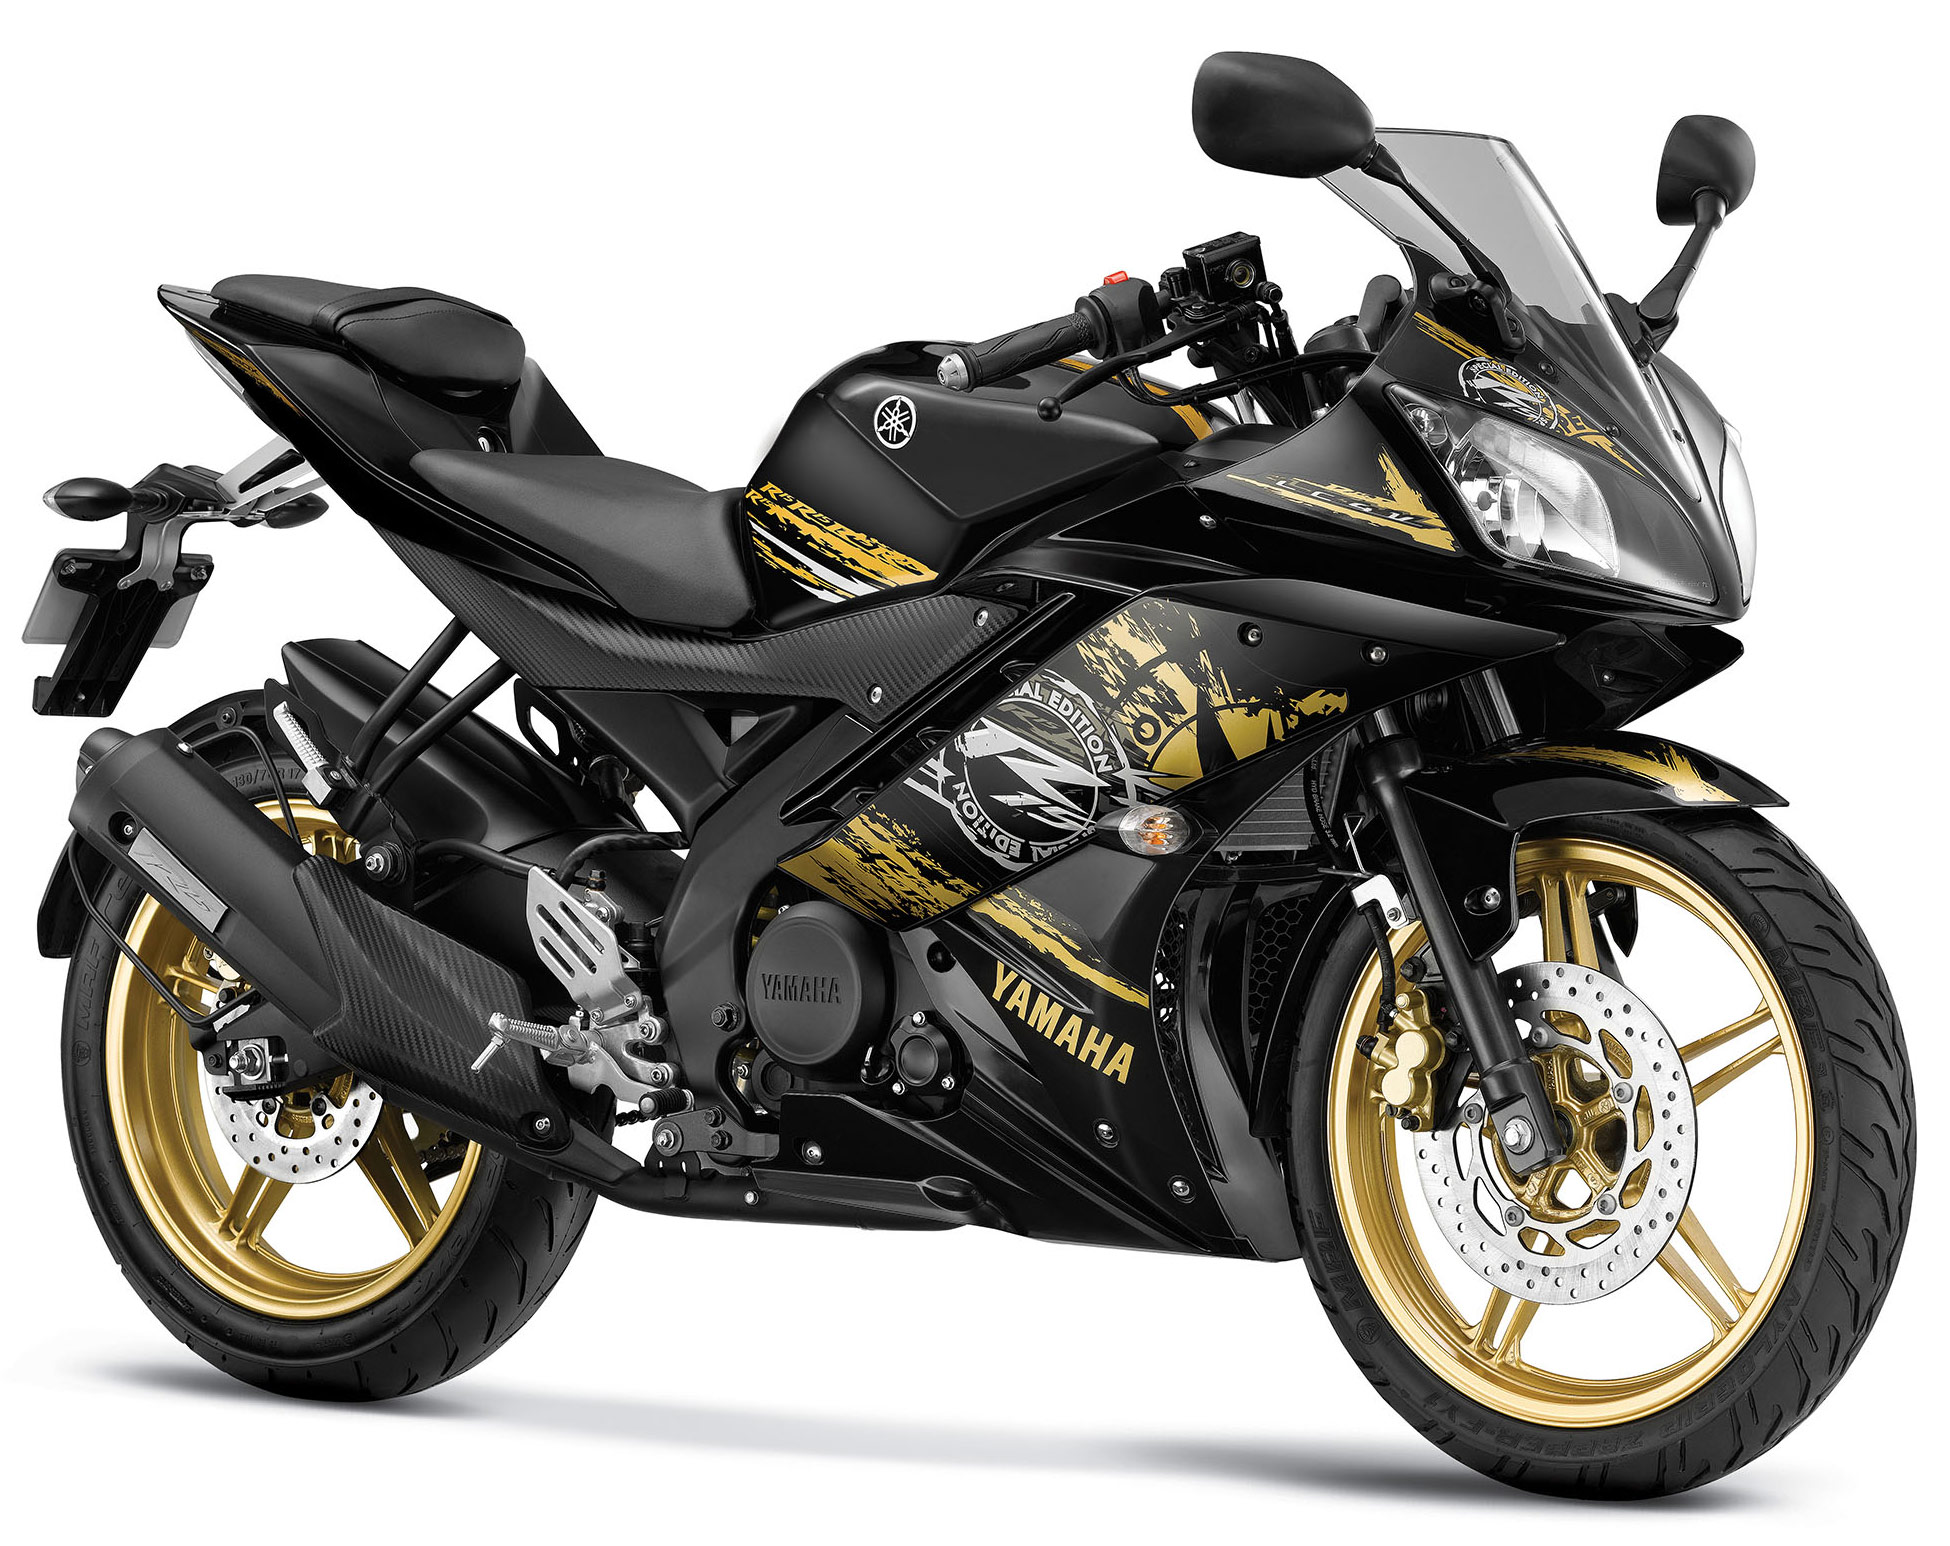 Yamaha R15 Grid Gold Edition Images, Wallpapers And Photos